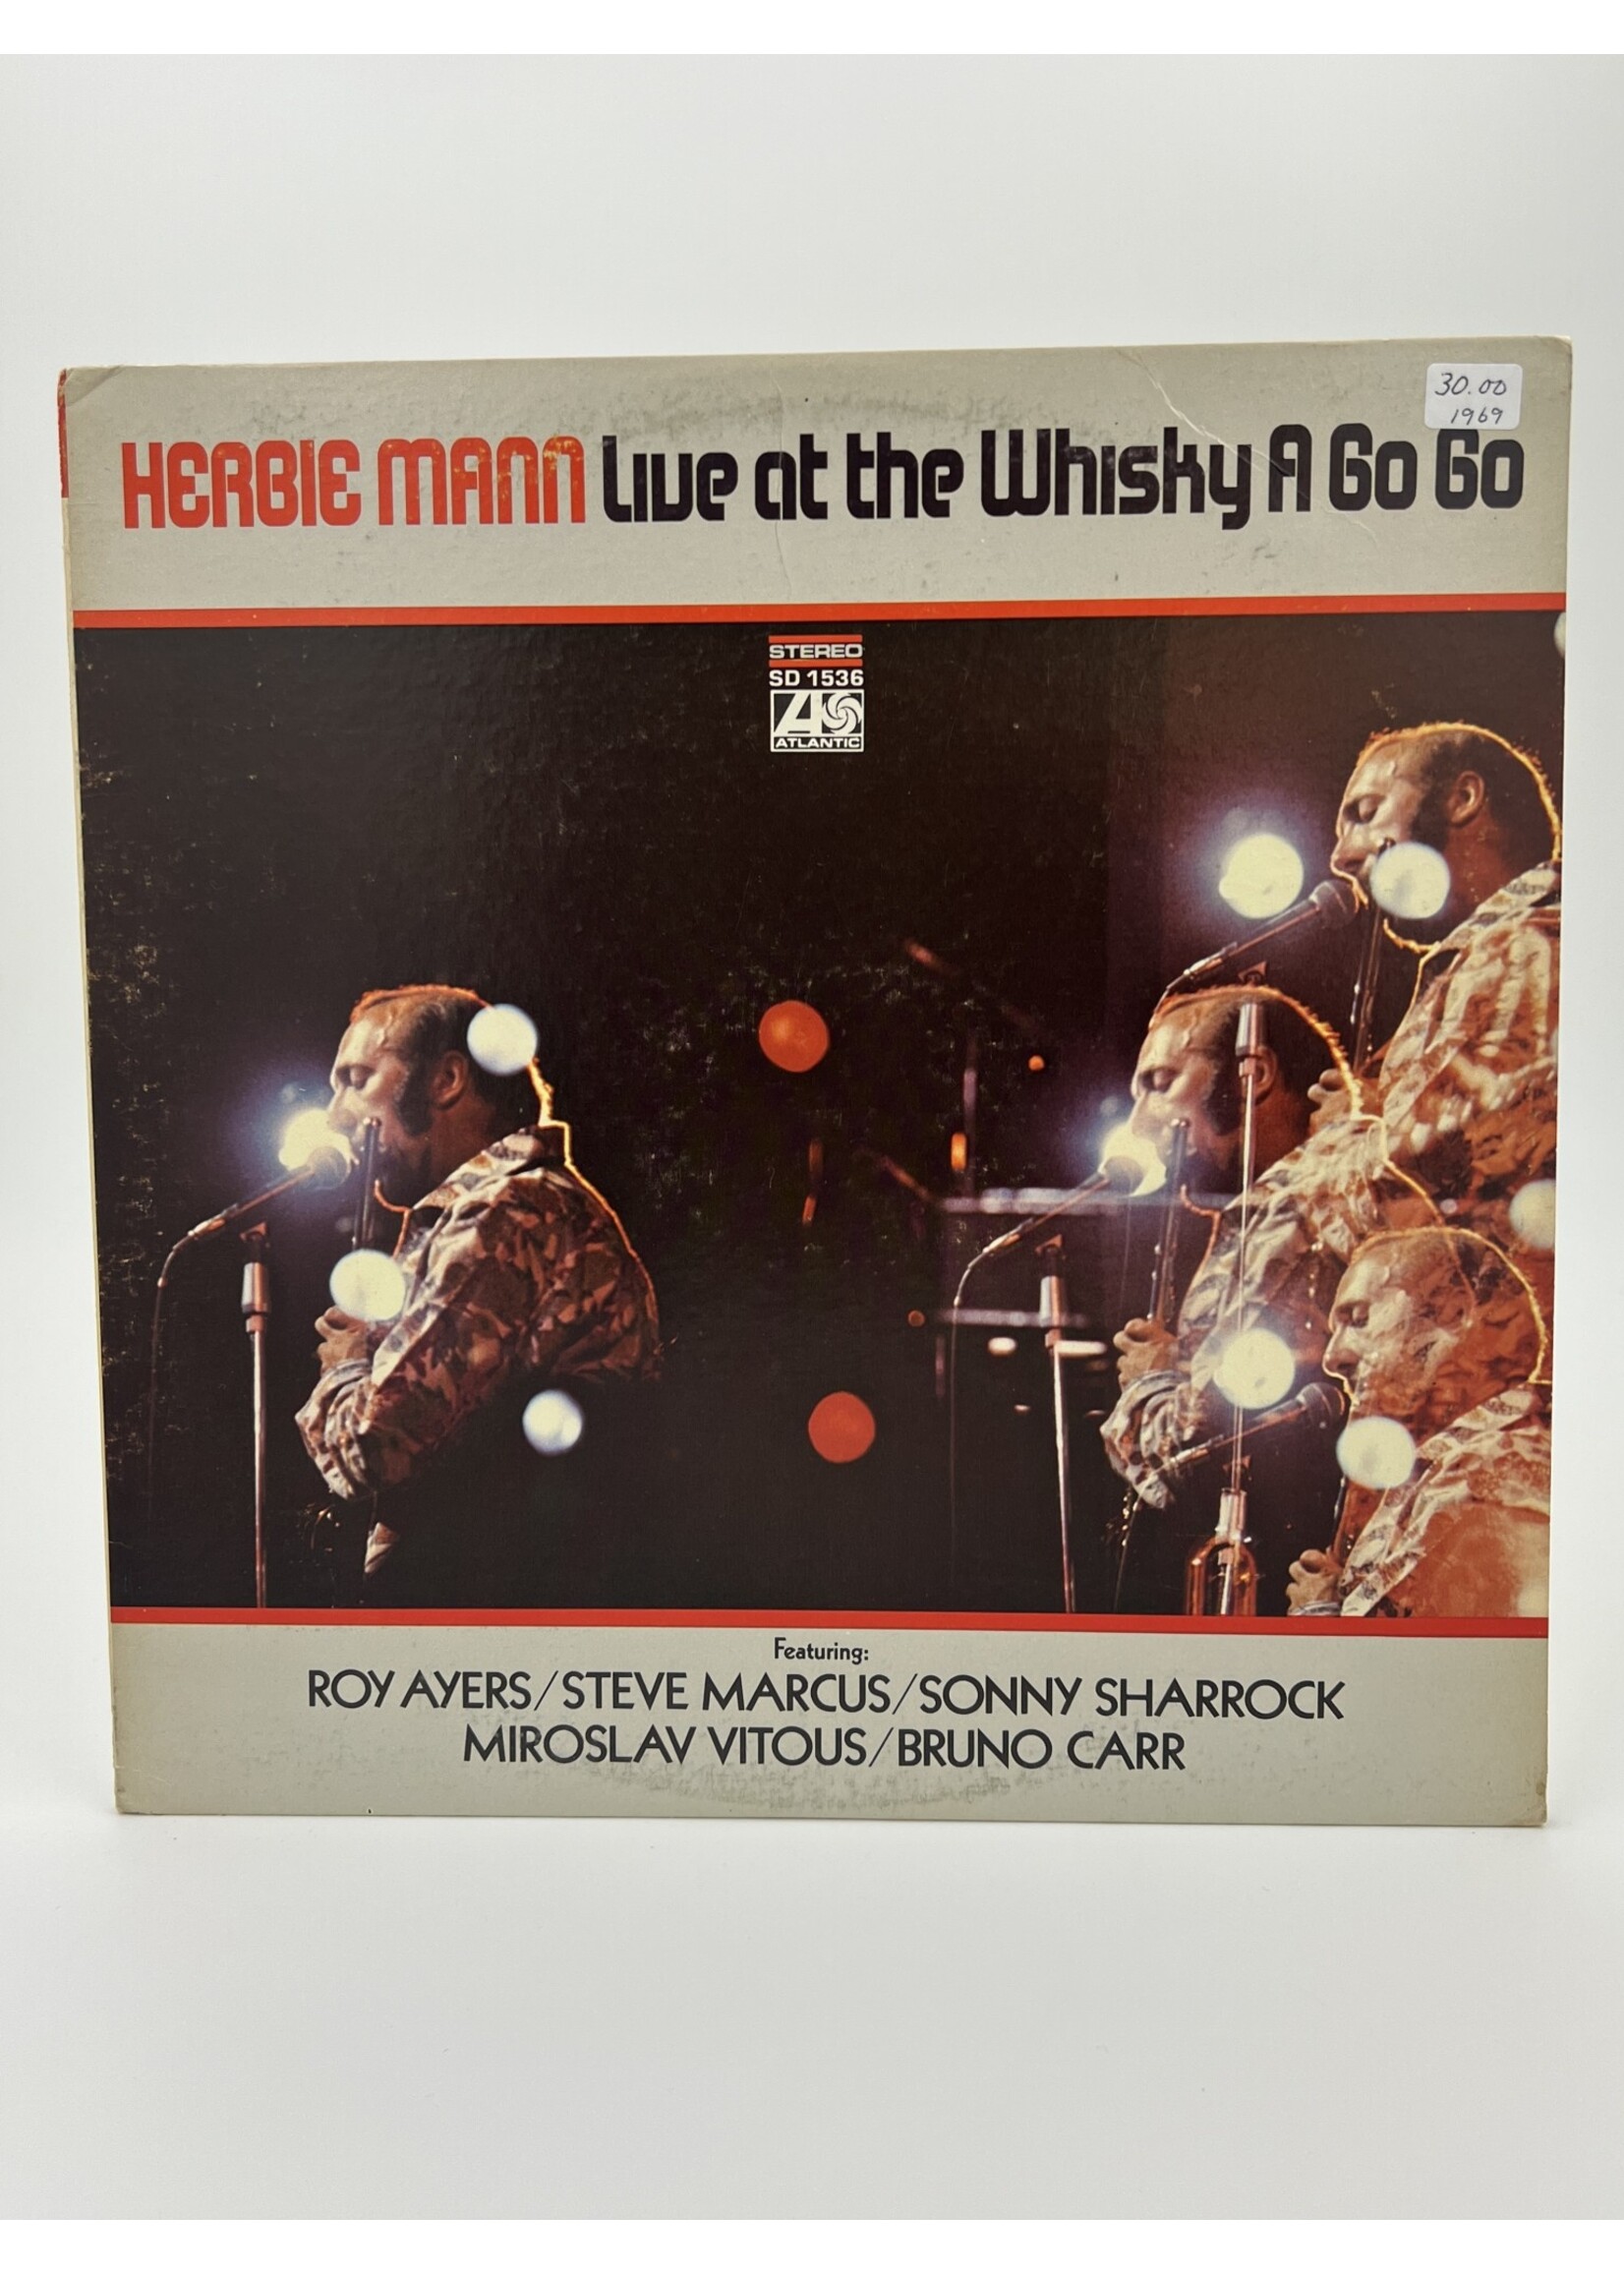 LP Herbie Mann Live At The Whisky A Go Go LP Record